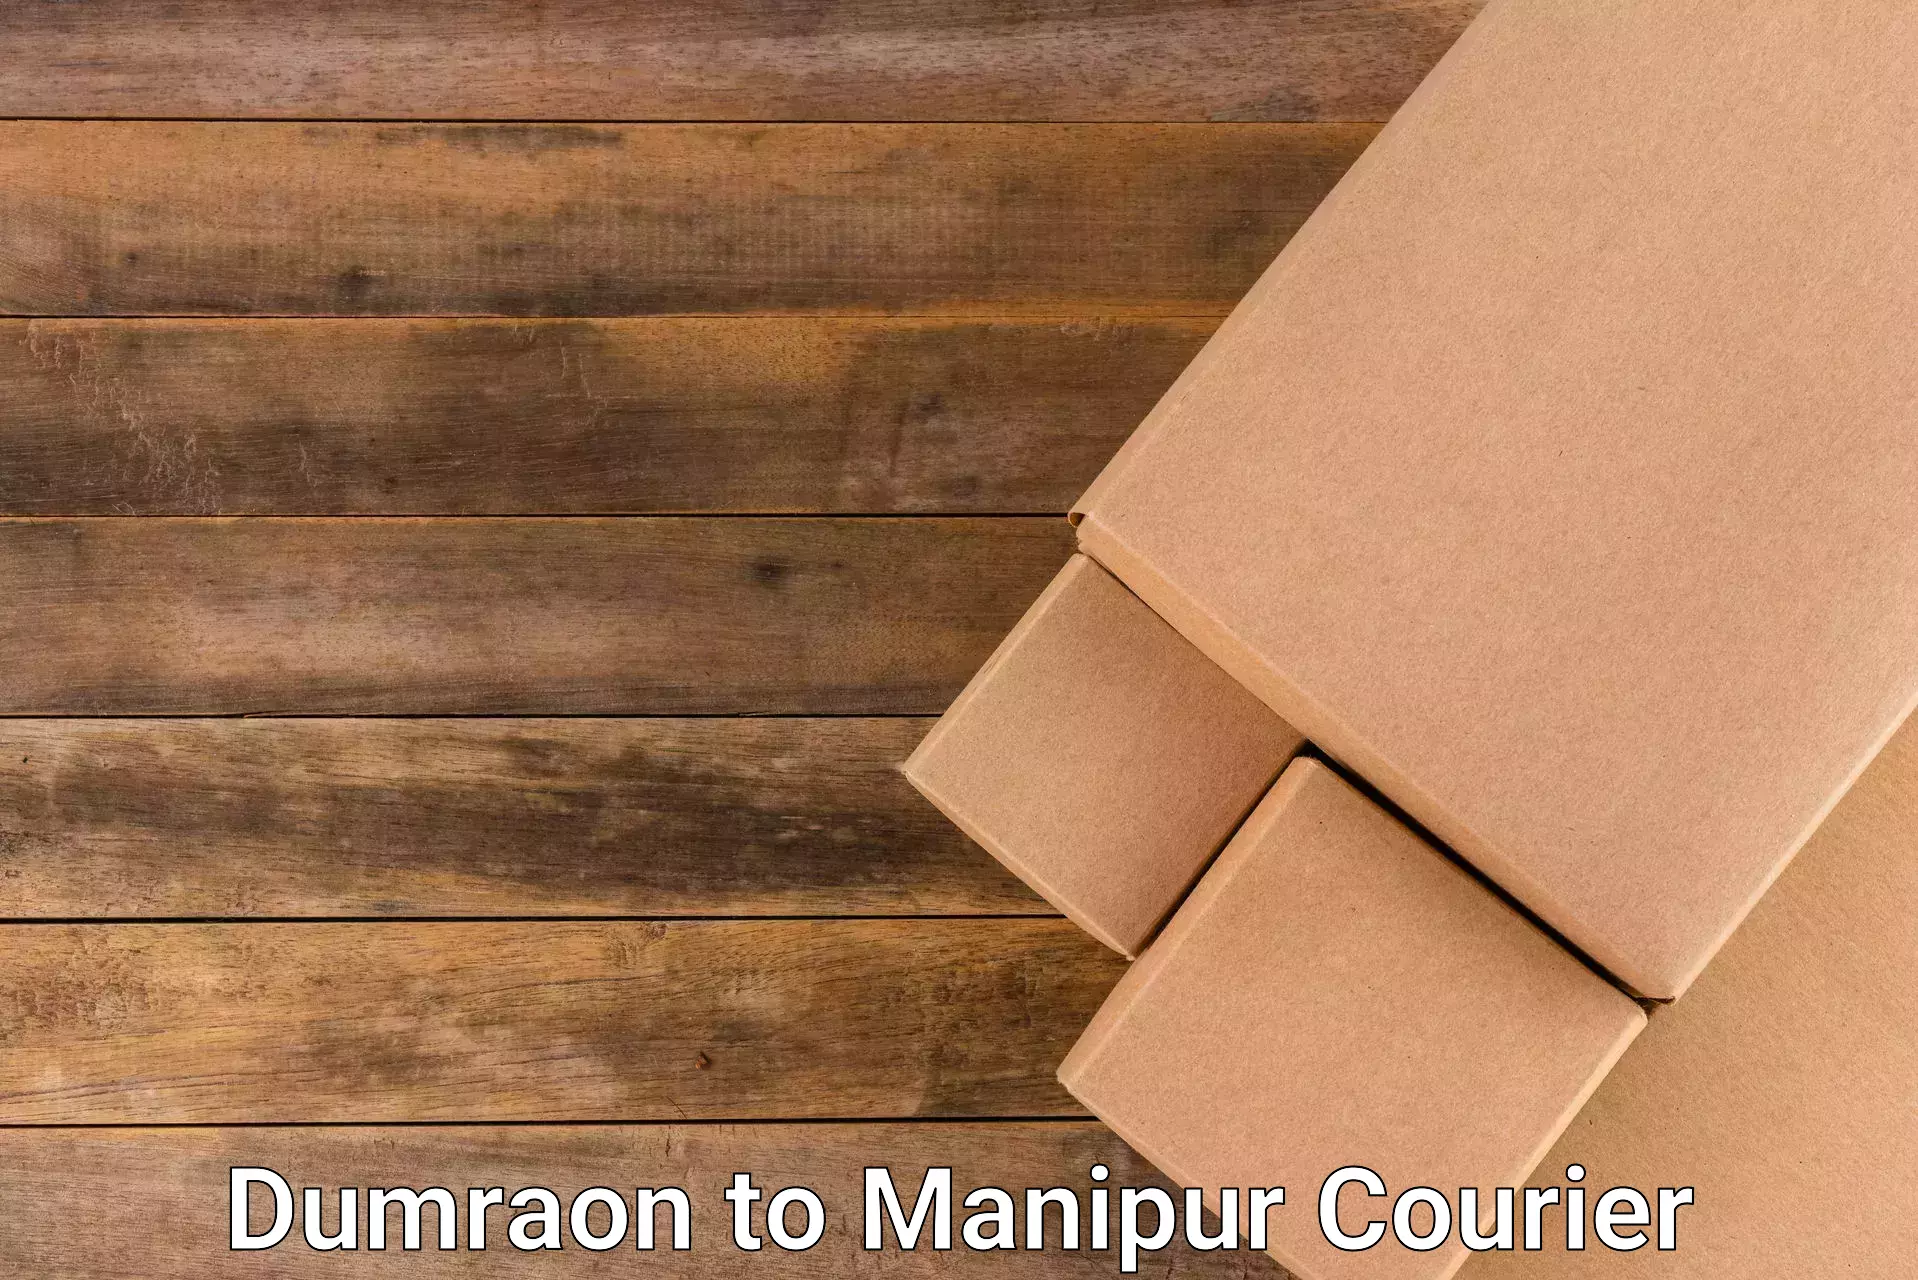 Supply chain efficiency Dumraon to Manipur